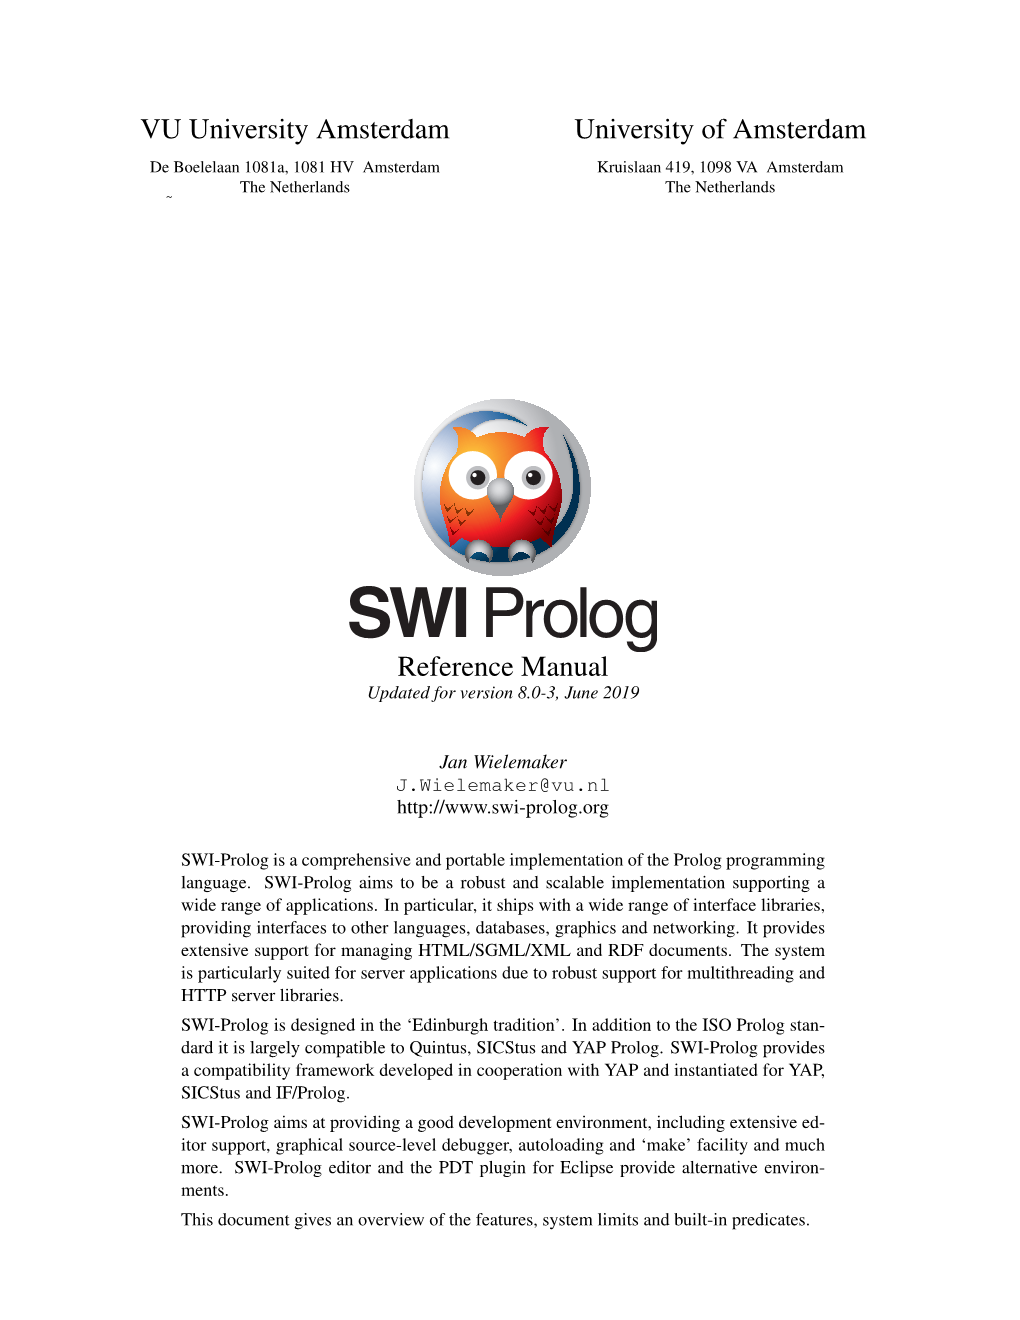 SWI-Prolog 8.0.3 Reference Manual In